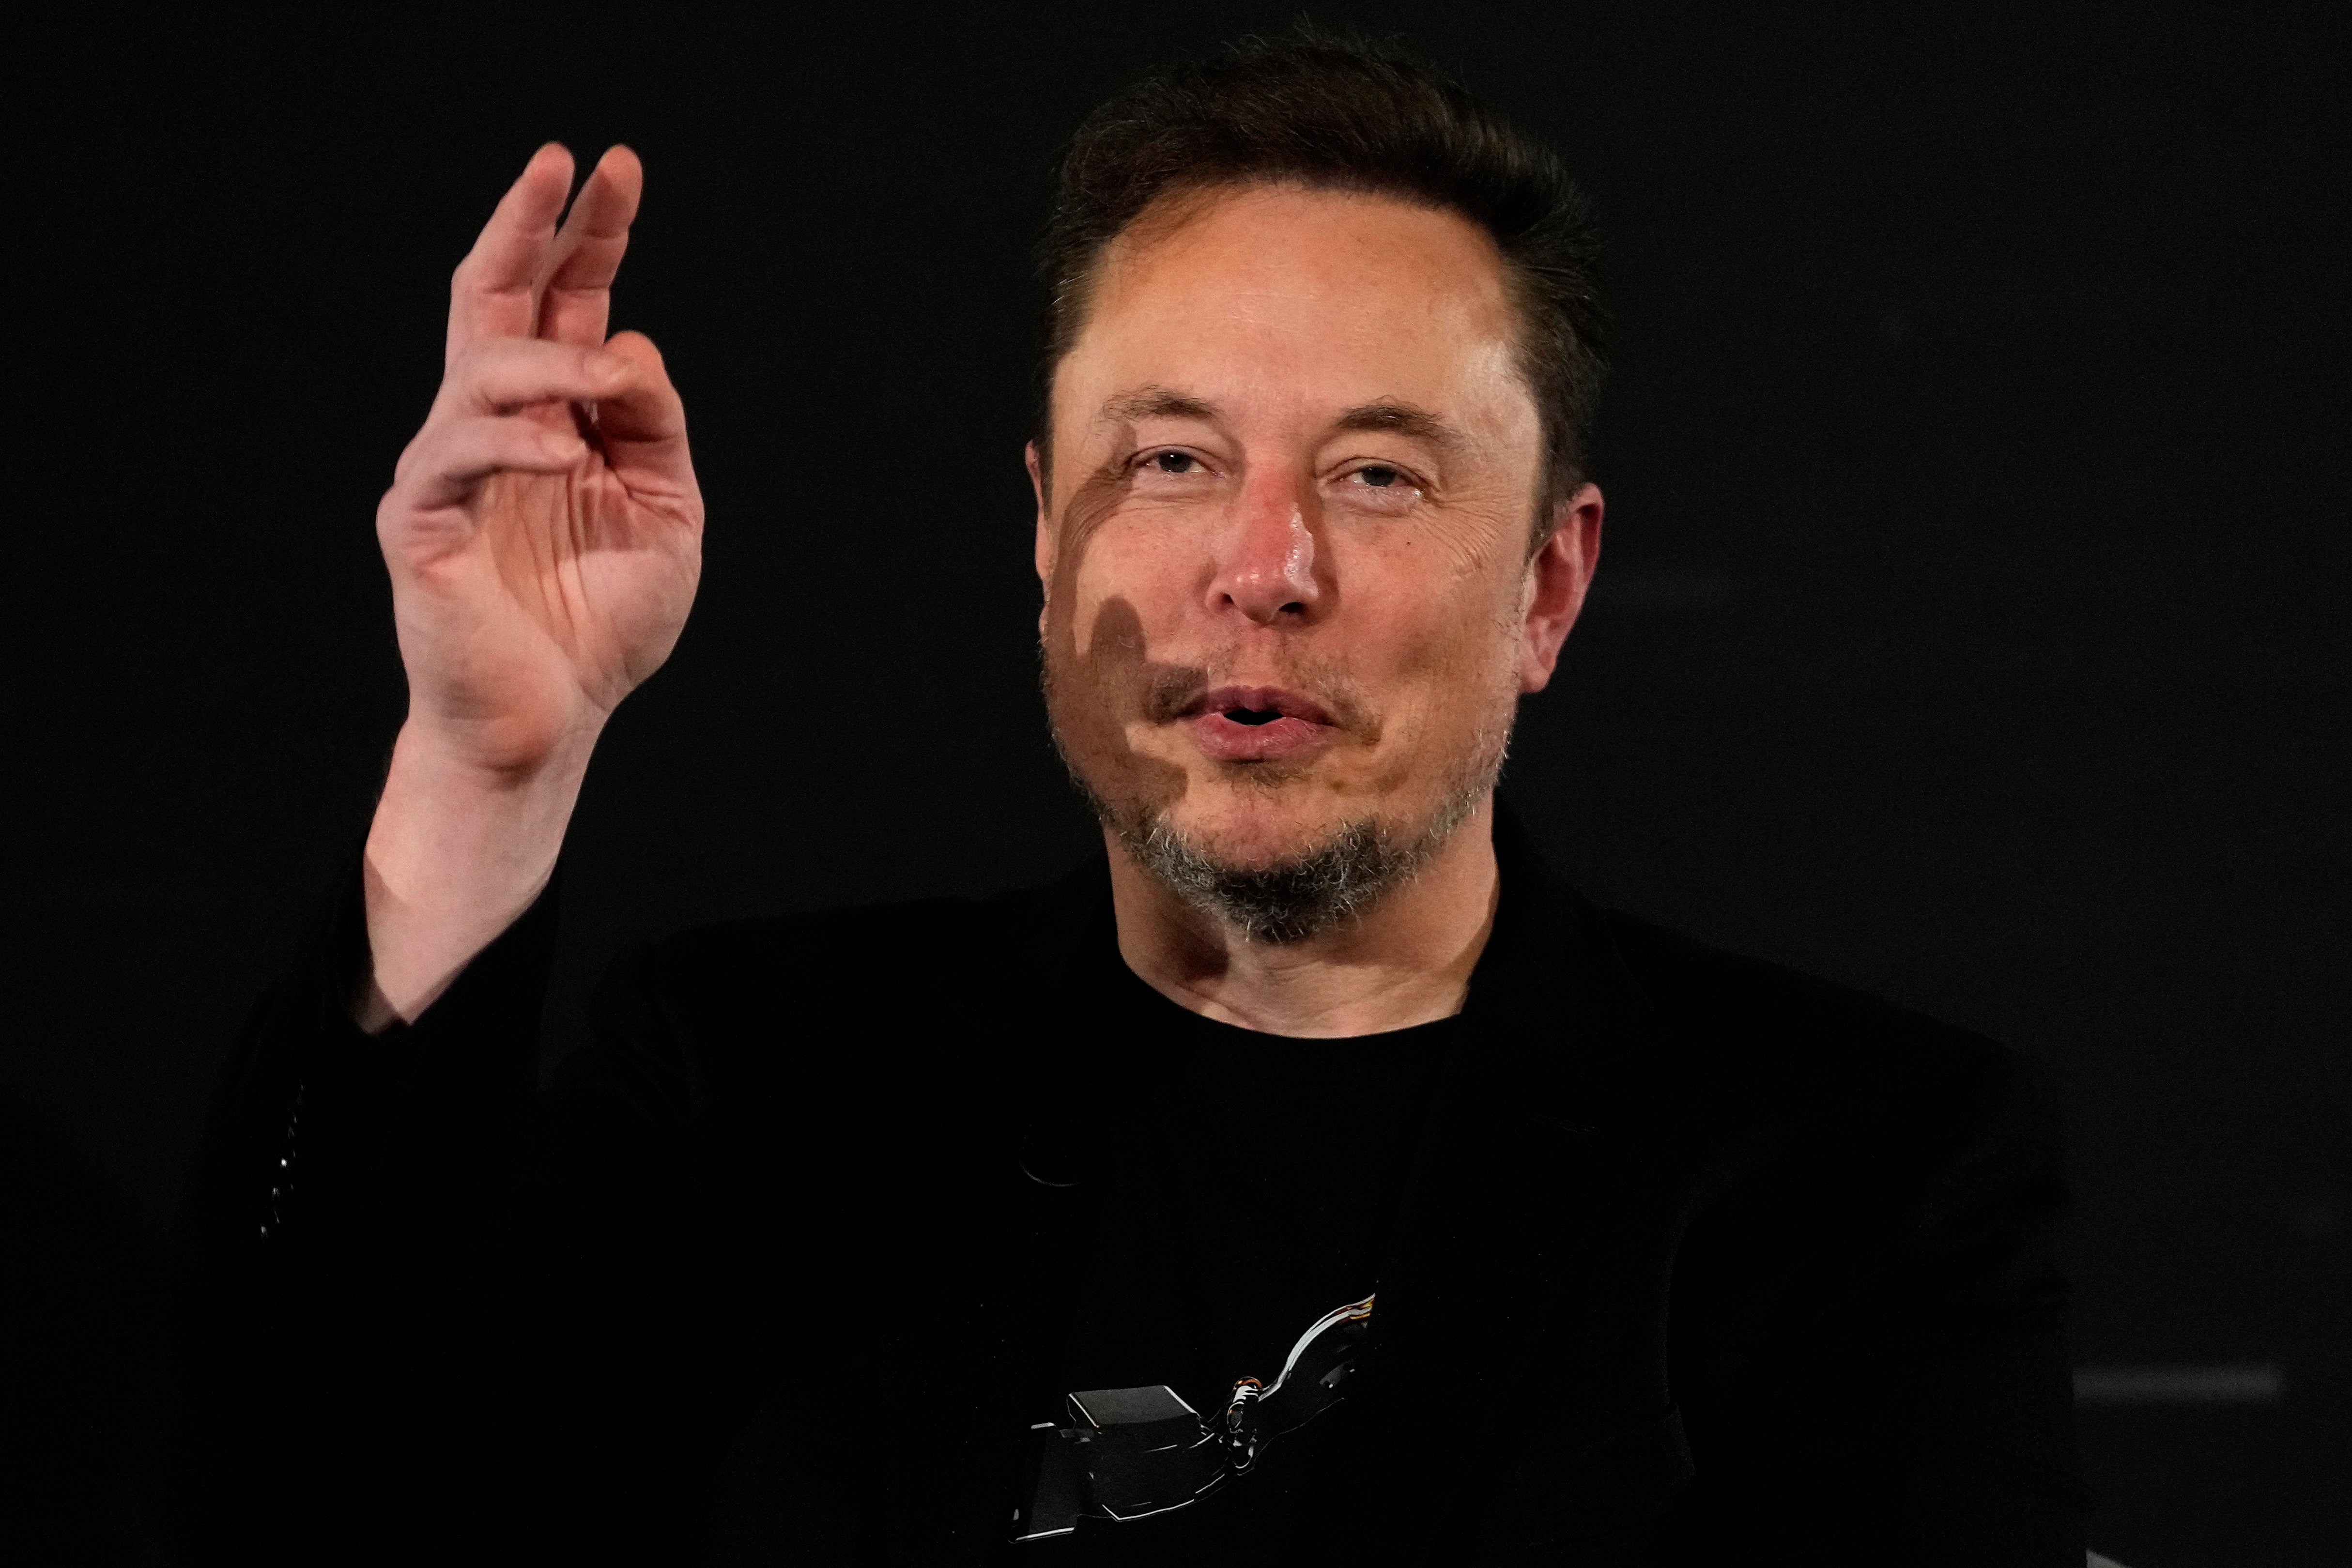 Elon Musk has demanded a larger stake in Tesla that would nearly double his current share